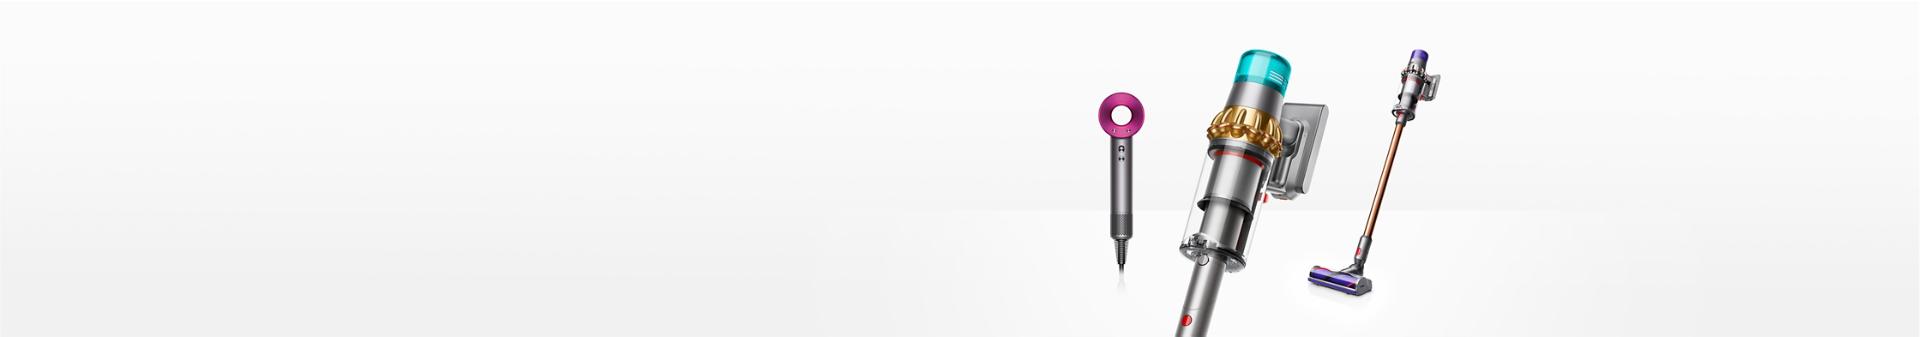 Dyson V15 Detect™ Complete and Dyson V12 Slim Complete™ vacuum cleaners, and Dyson Supersonic™ hair dryer (Iron/Fuchsia)